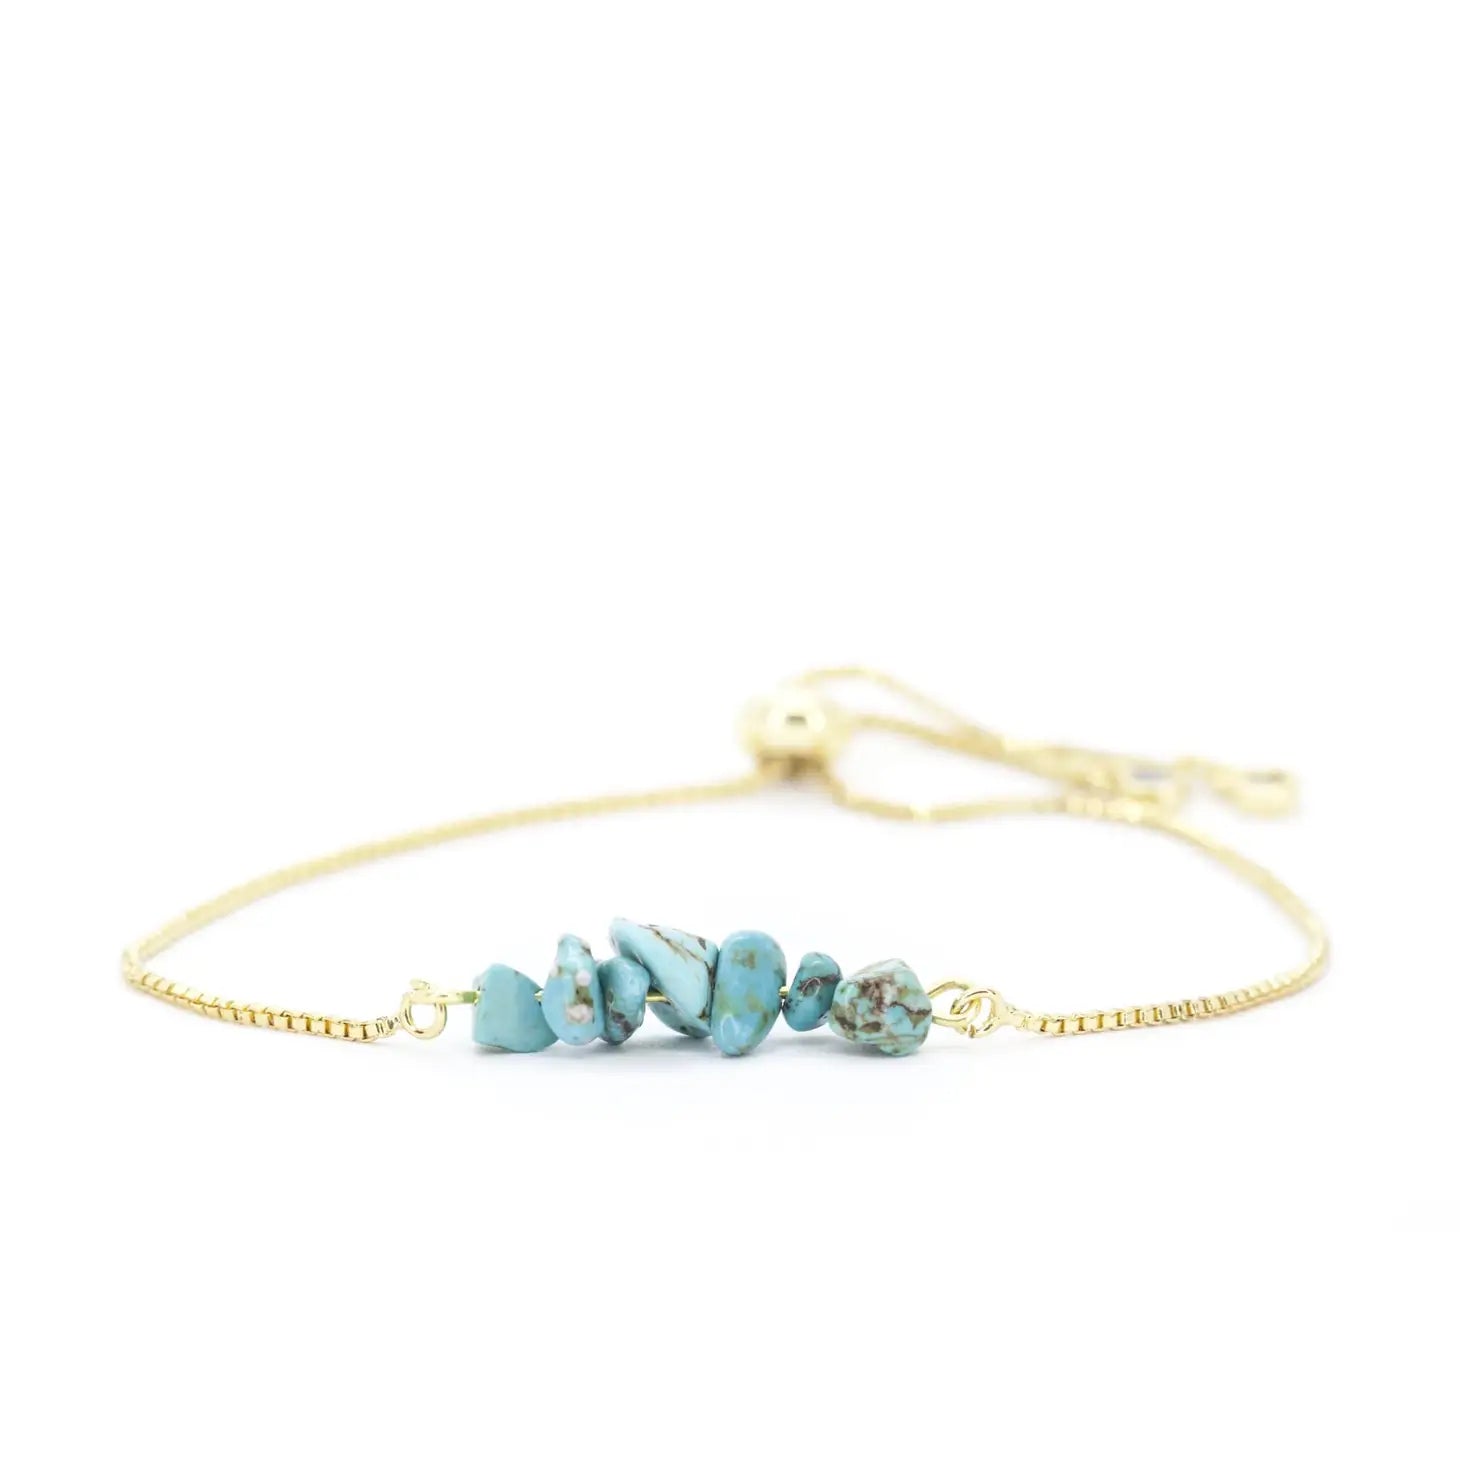 Salty Cali: Protection Stone, Turquoise Bolo